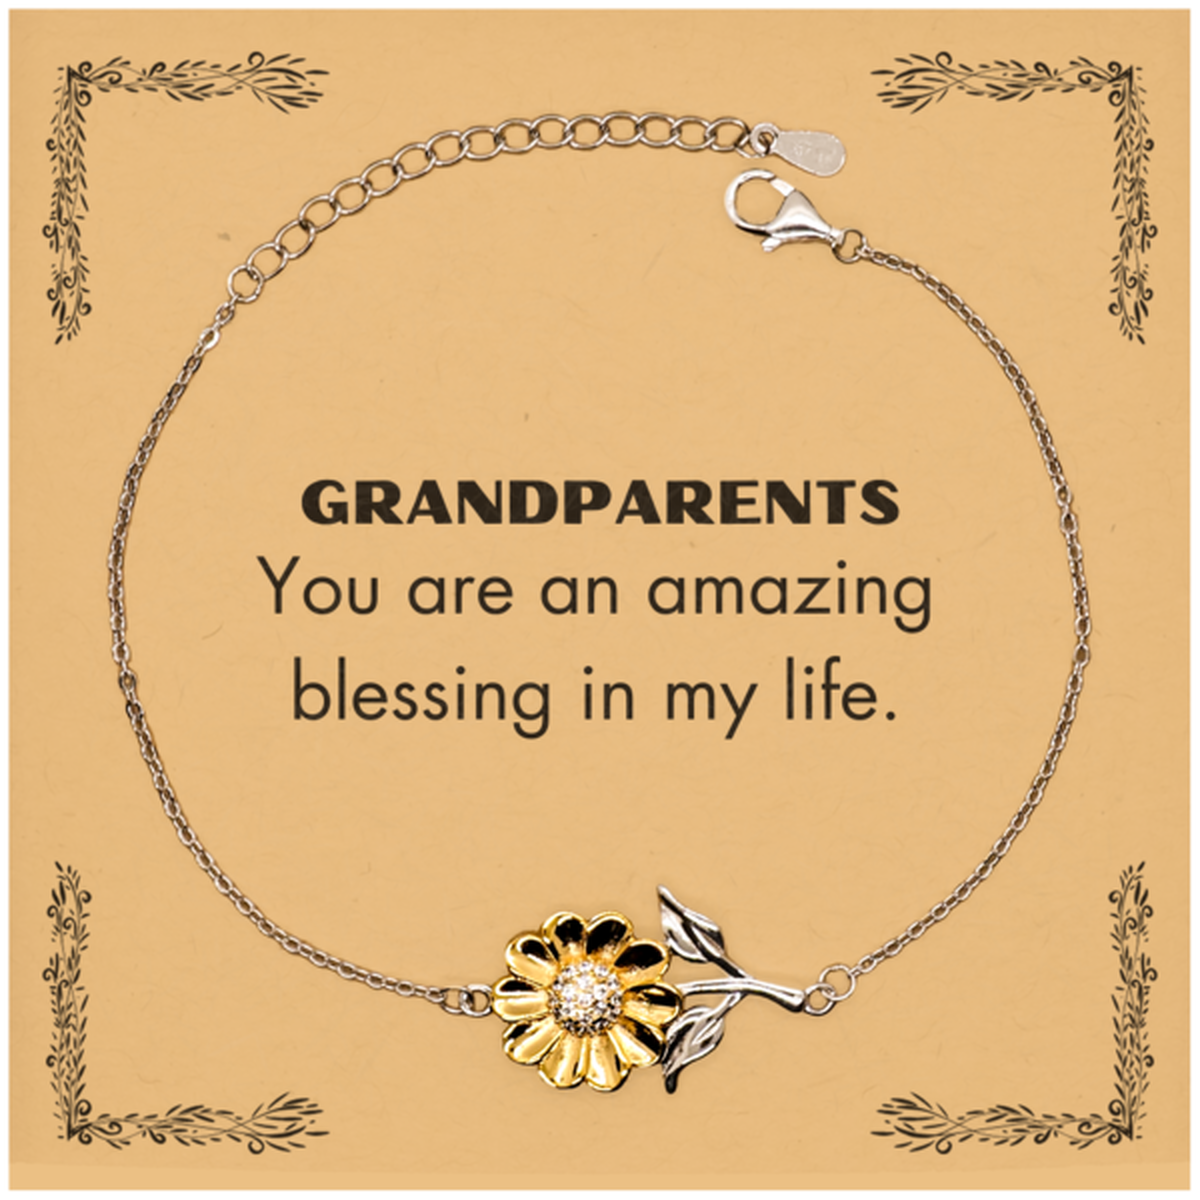 Grandparents Sunflower Bracelet, You are an amazing blessing in my life, Thank You Gifts For Grandparents, Inspirational Birthday Christmas Unique Gifts For Grandparents